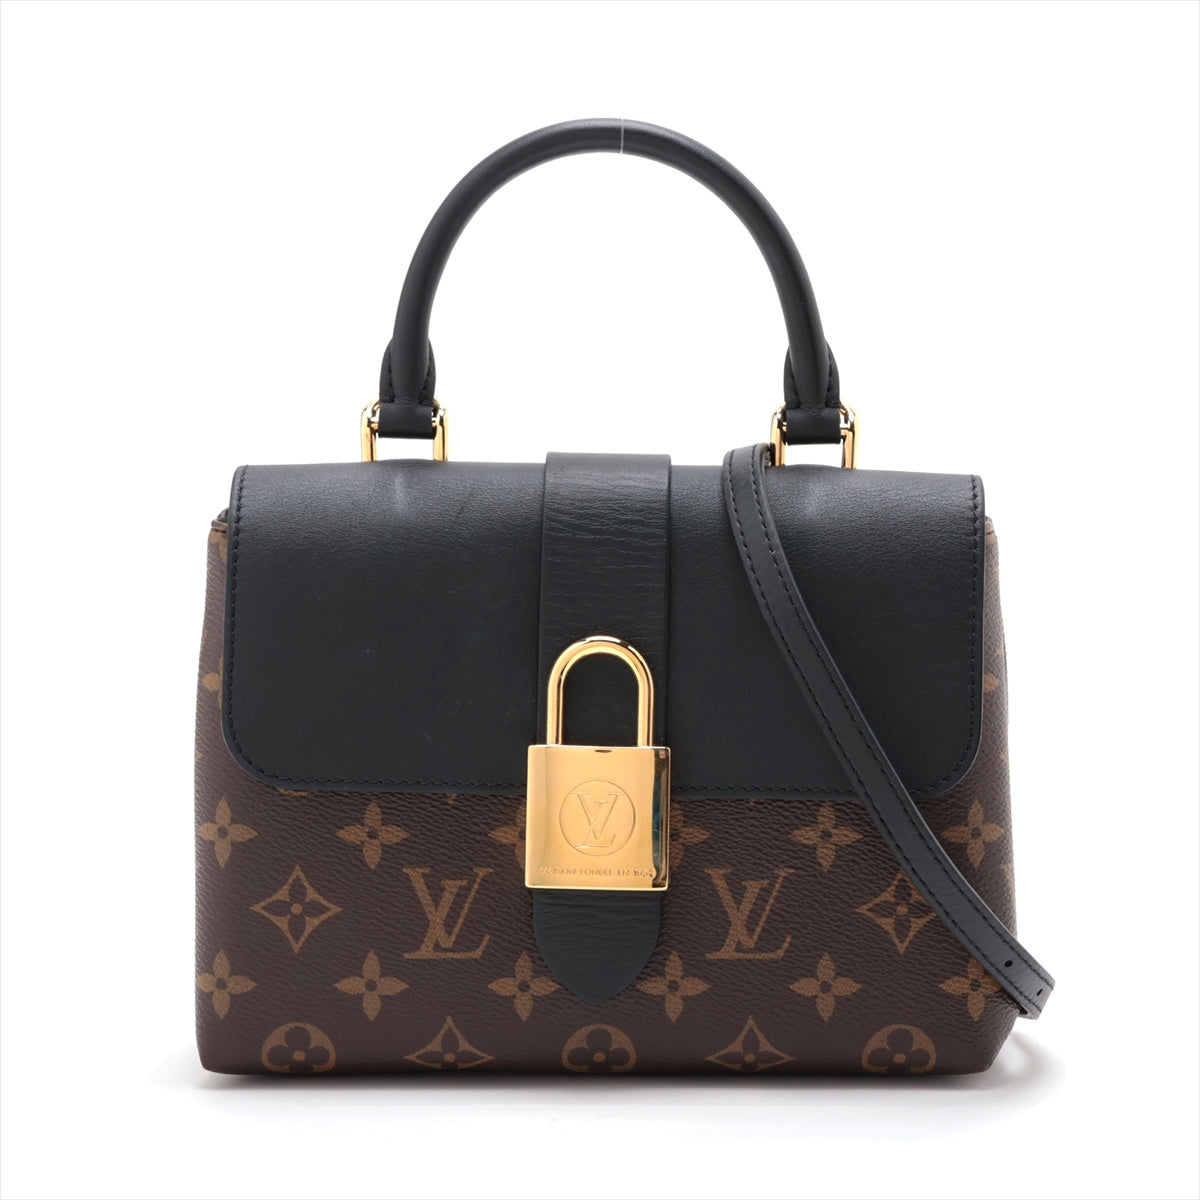 Louis Vuitton Monogram Rocky BB M44141 There was an RFID response